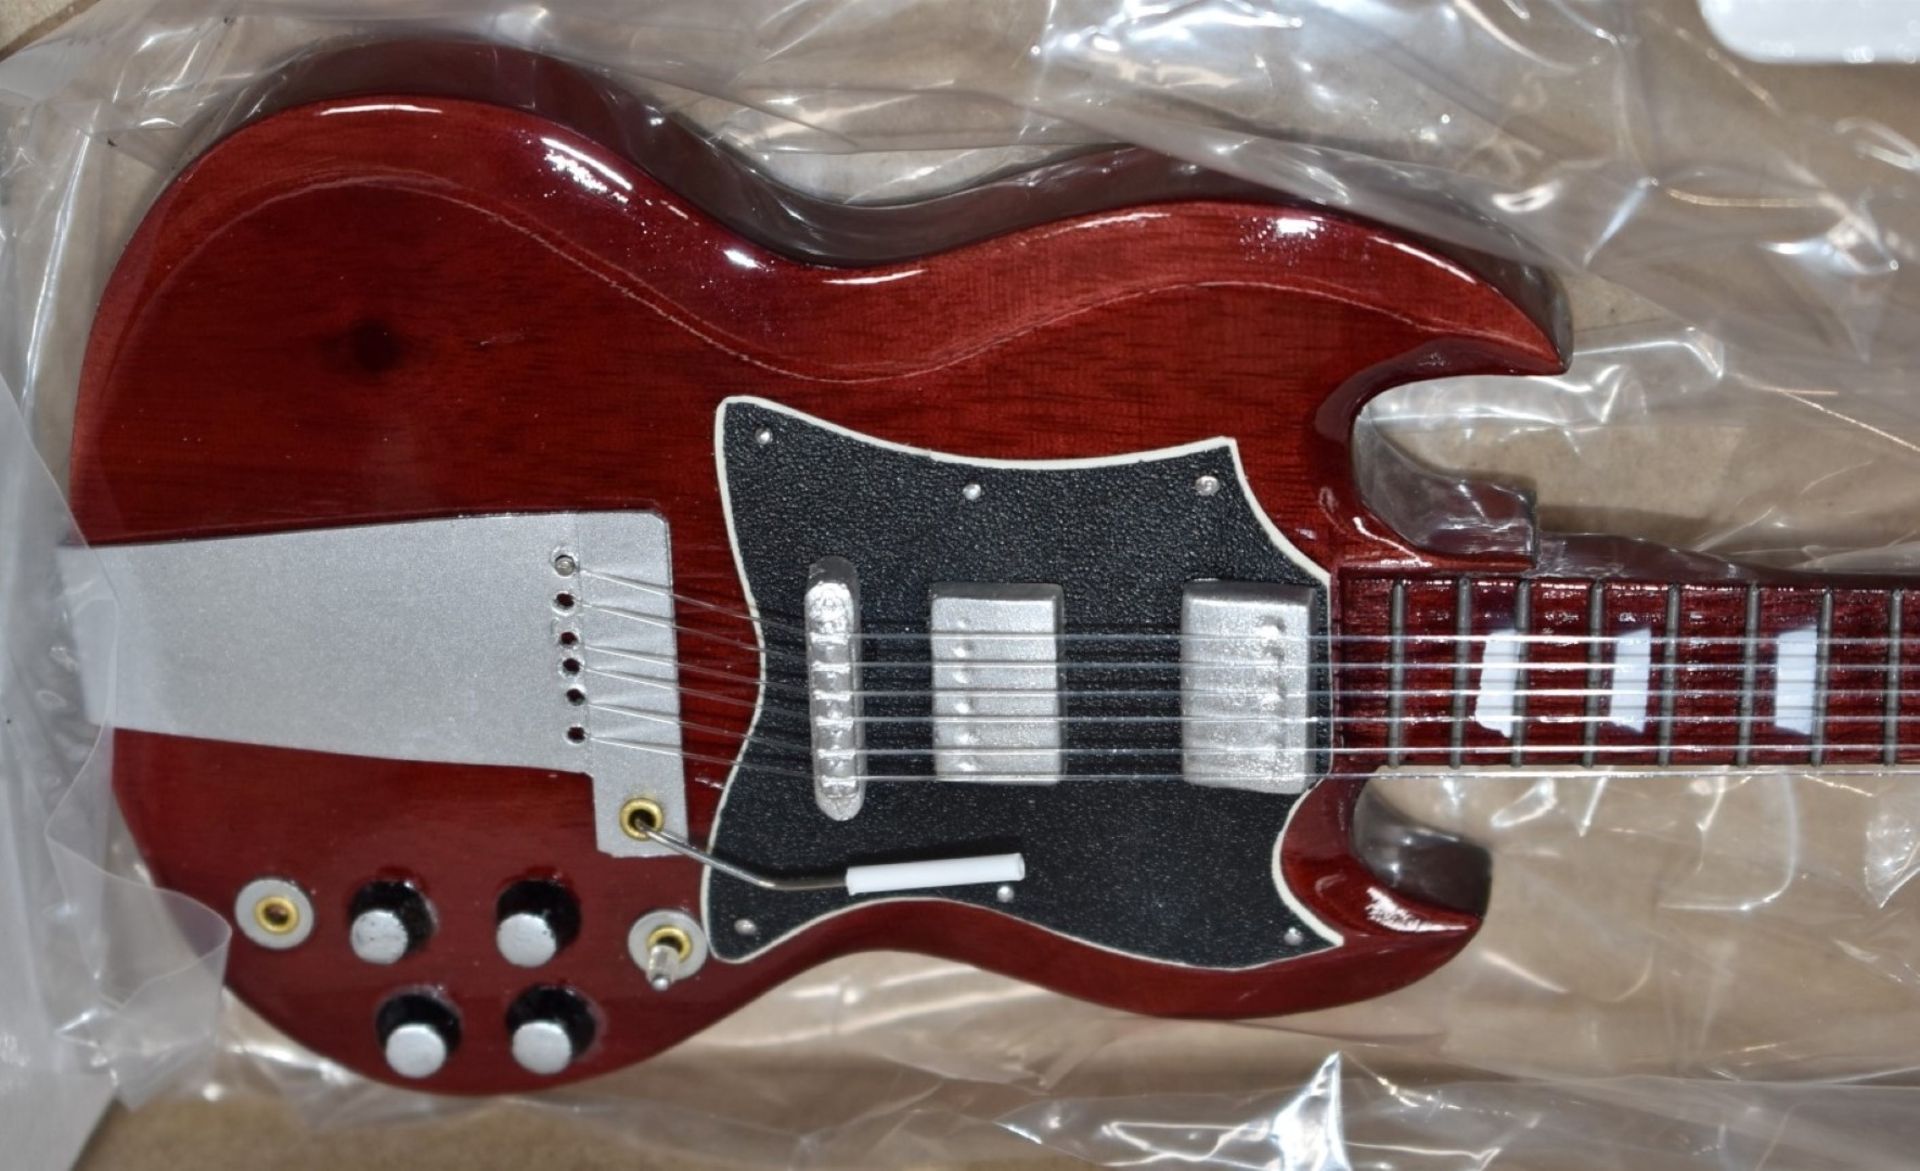 1 x Miniature Hand Made Guitar - ACDC Angus Young Gibson SG - New & Unused - RRP £35 - Boxed With - Image 6 of 7